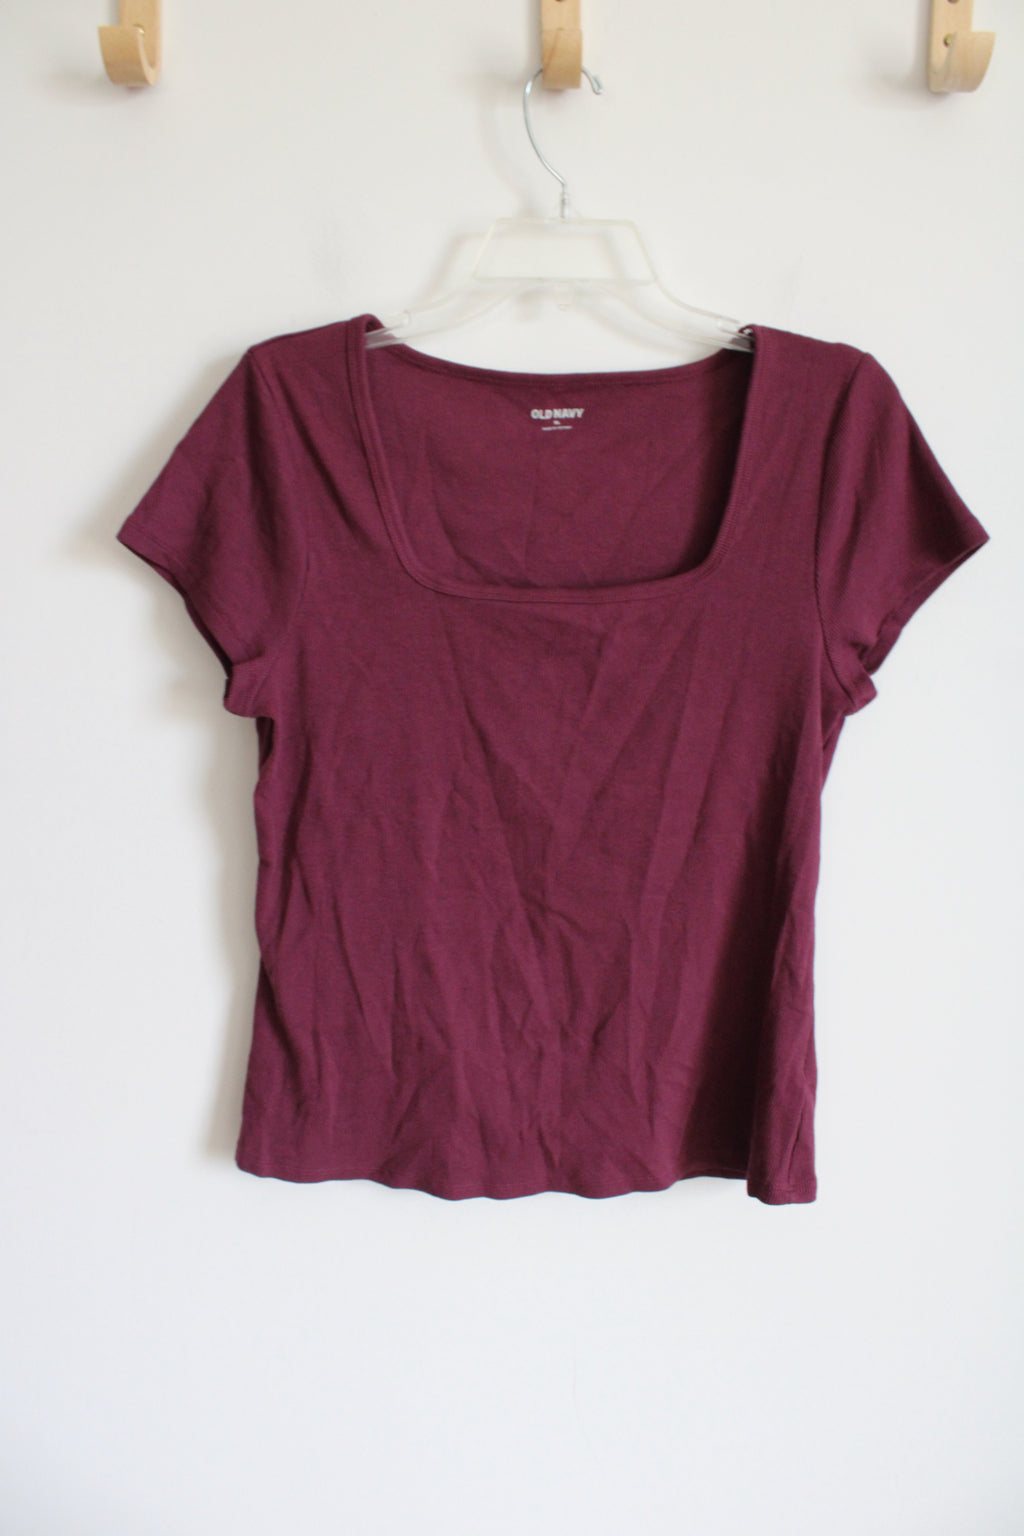 Old Navy Burgundy Ribbed Square Neck Top | XL